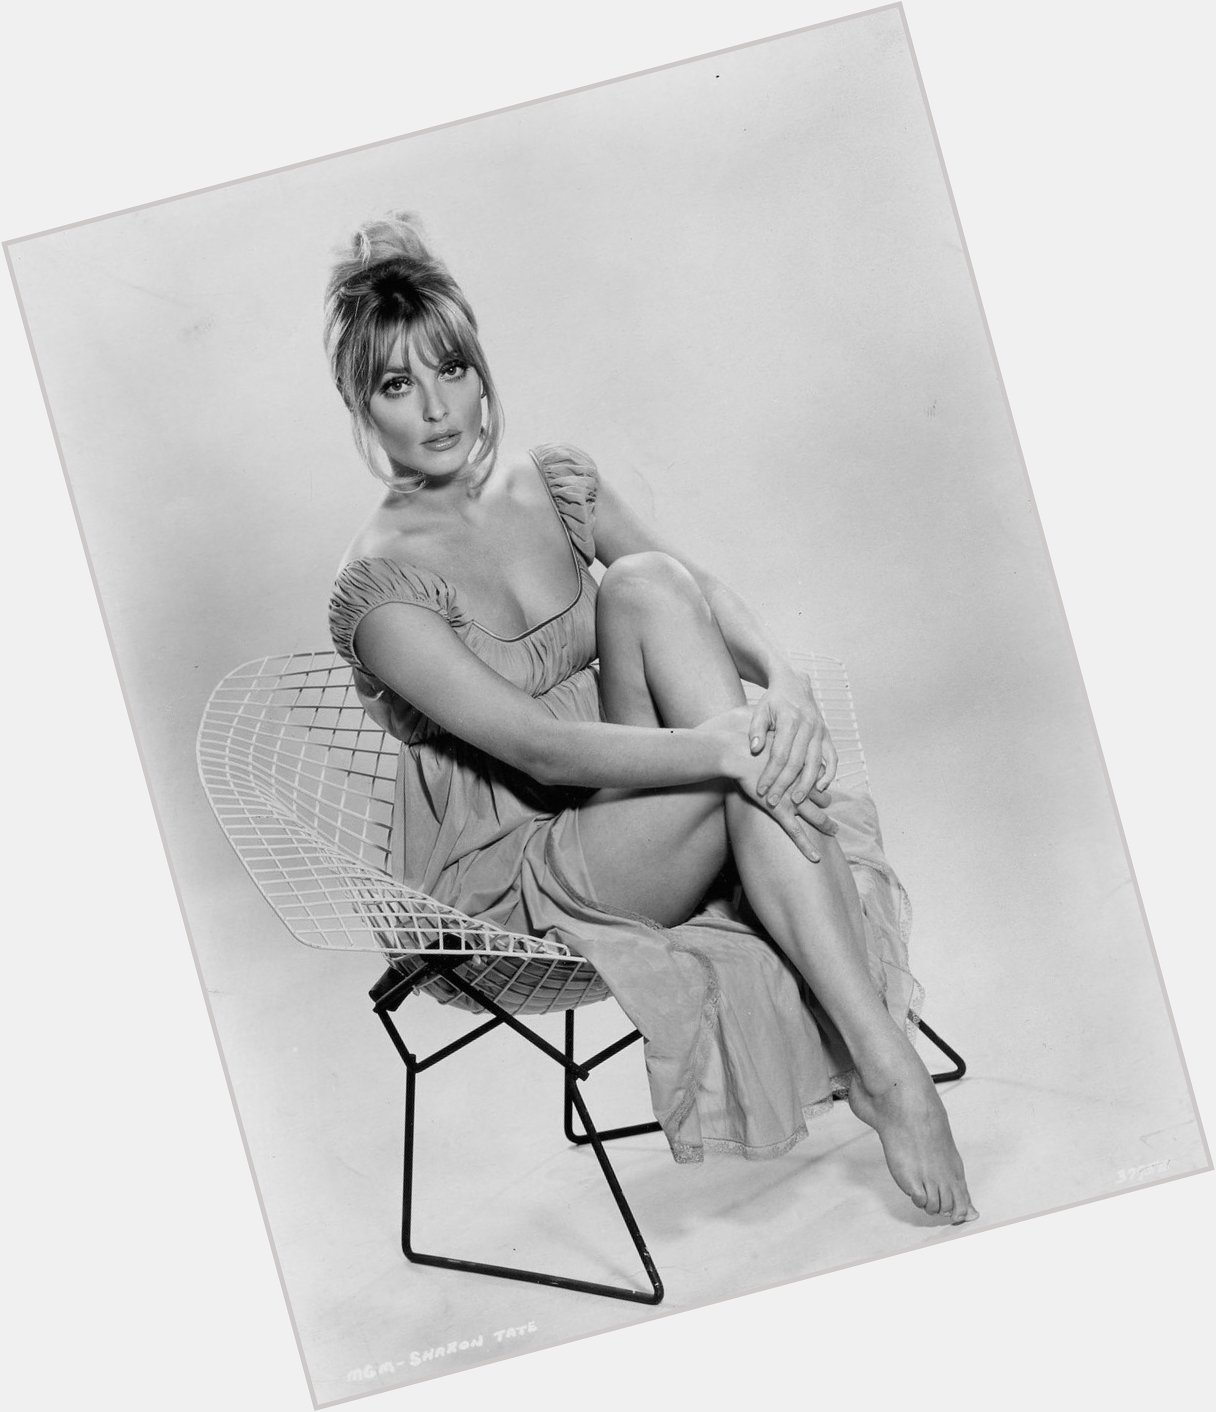 Happy heavenly birthday Sharon Tate, gone too soon but never forgeotten. I love you    